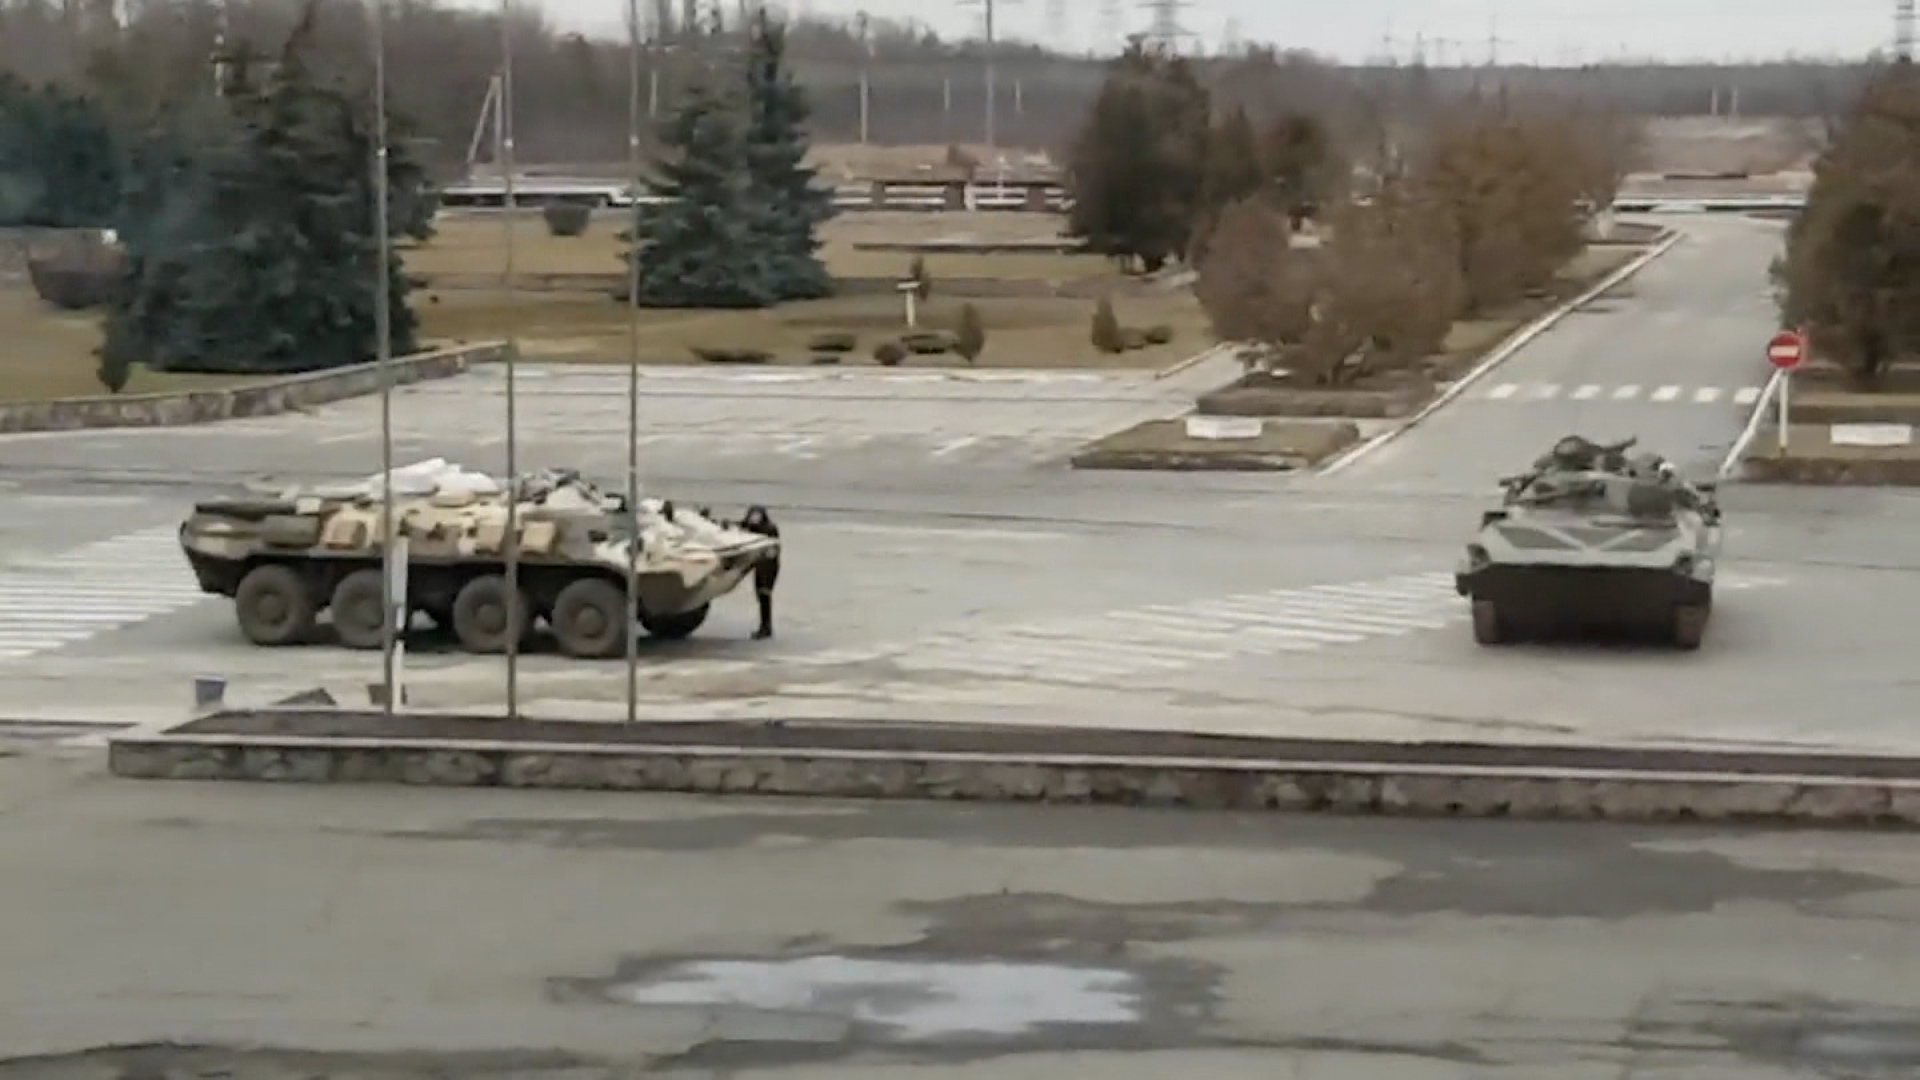 Russian military vehicles are seen at Chernobyl near Pripyat, Ukraine, in this screenshot taken from a video uploaded to social media in late February.